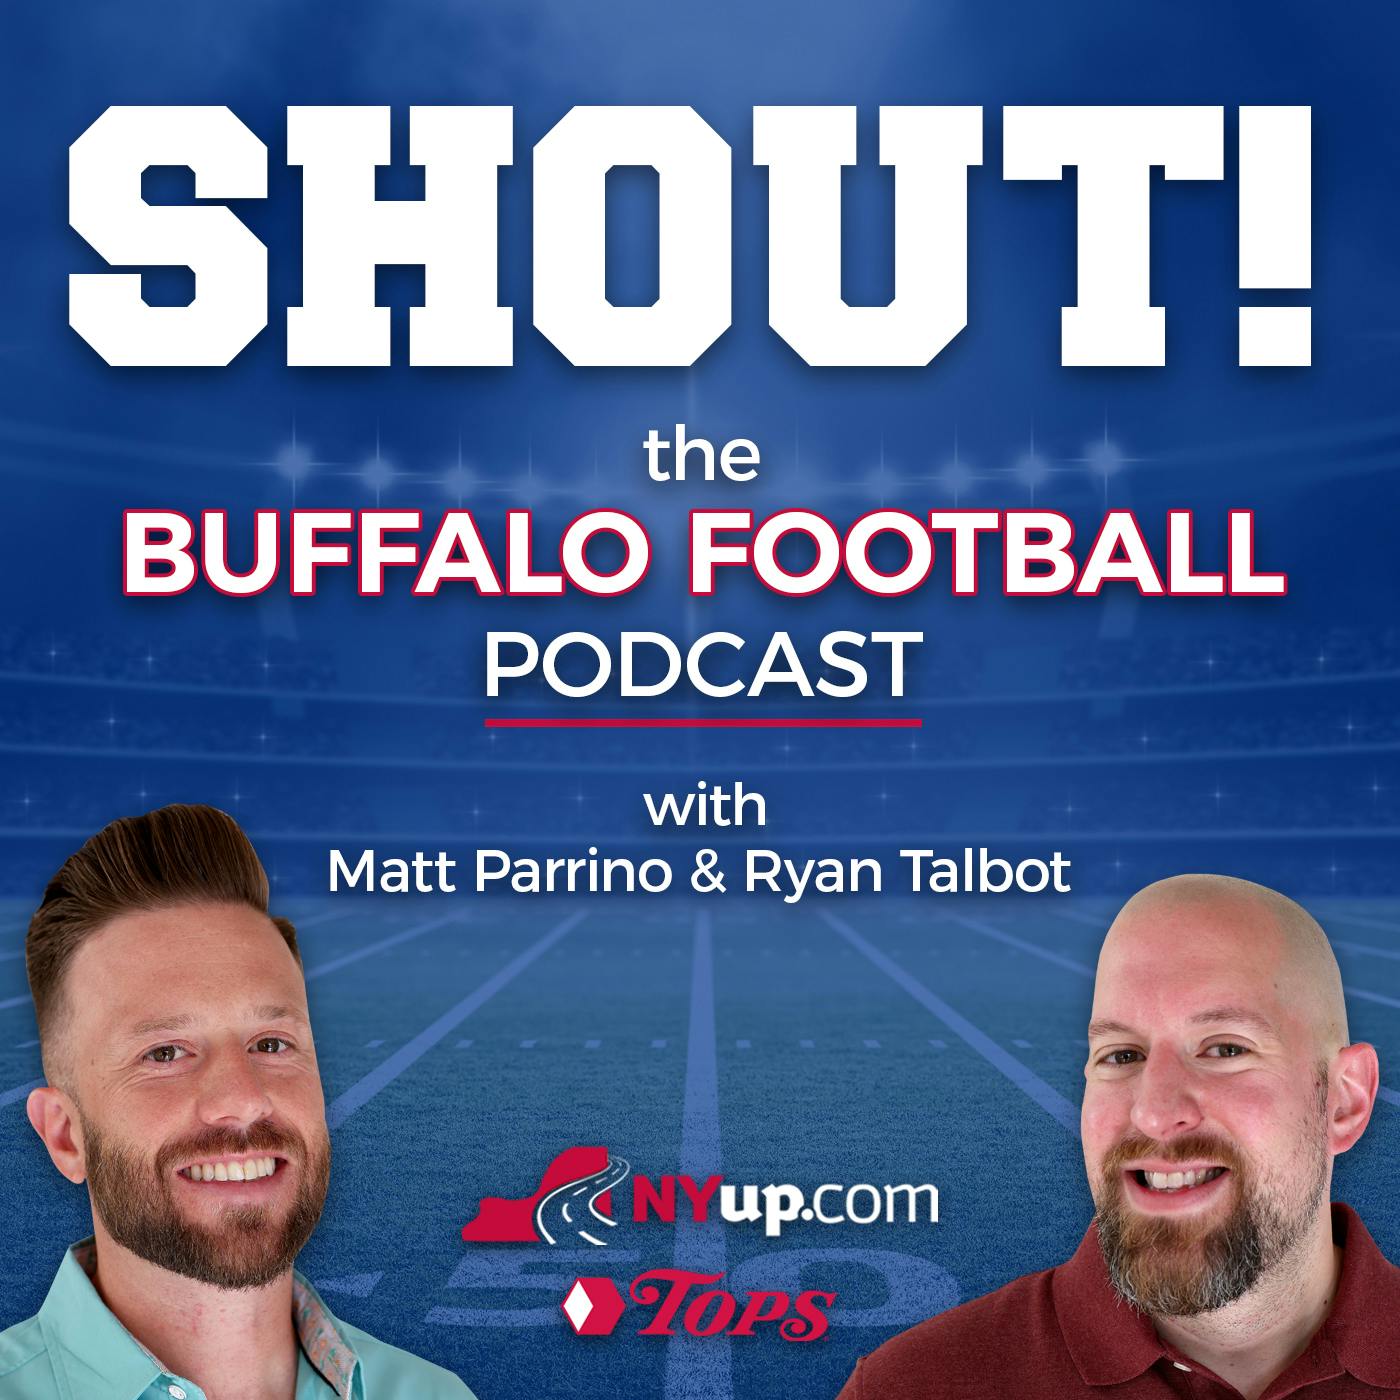 Are the Bills zeroing in on a free agent safety target? Plus, what Taron Johnson deal means & fan questions with guest Bruce Nolan